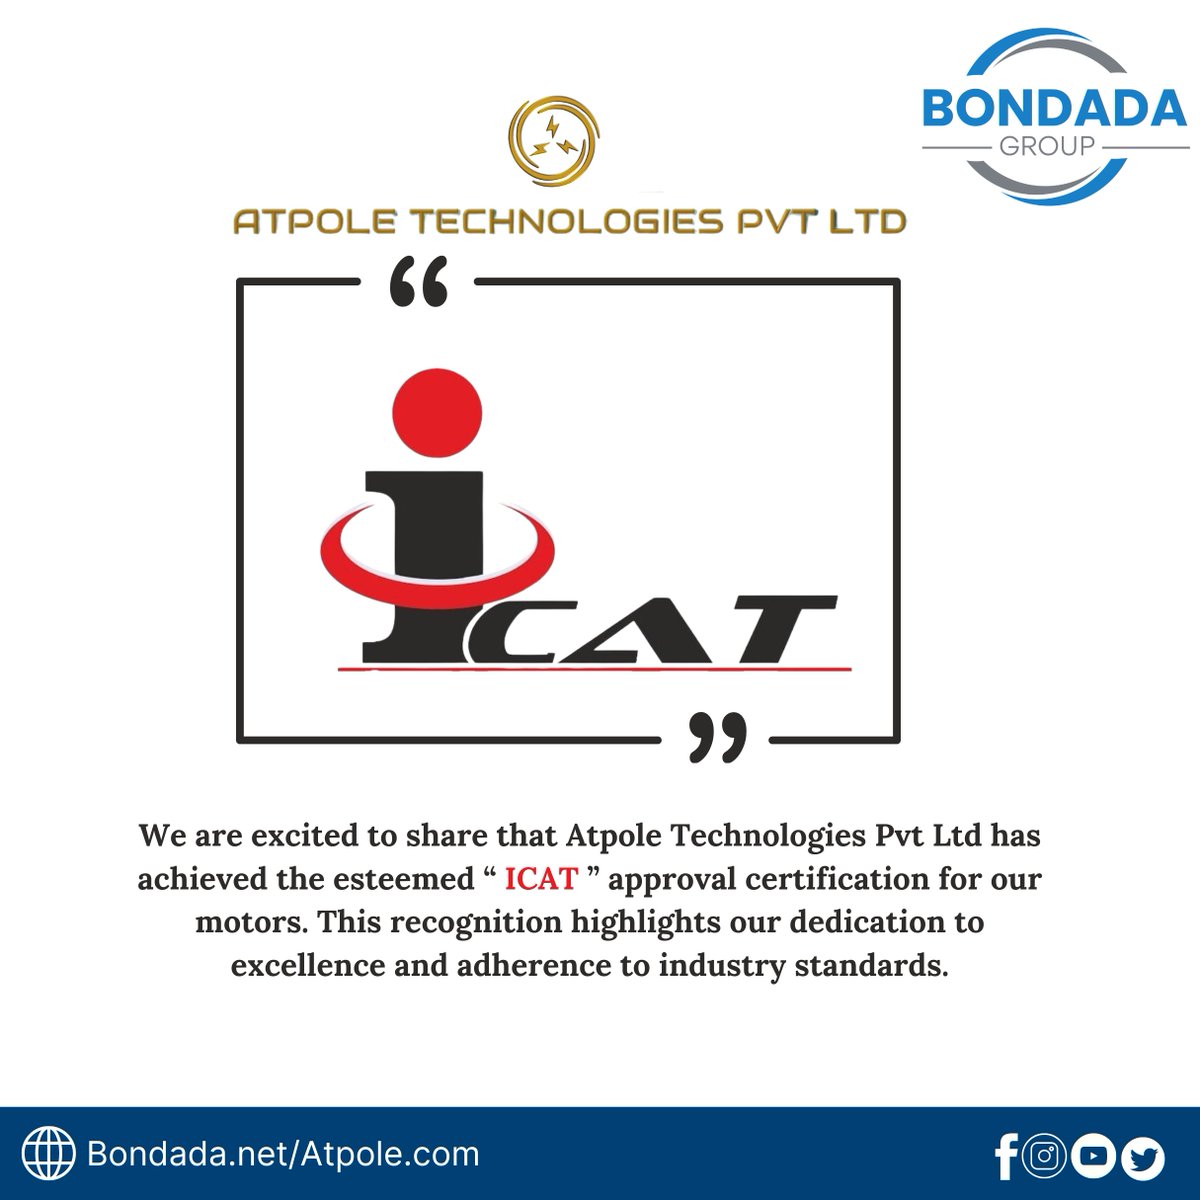 🌟 Exciting news alert! 🎉
Atpole Technologies Pvt Ltd clinched the motors' prestigious #ICAT approval certification!  It's a testament to our commitment to excellence and industry standards.

Let's drive towards quality together! 
#Bondadagroup #AtpoleTech #QualityMatters